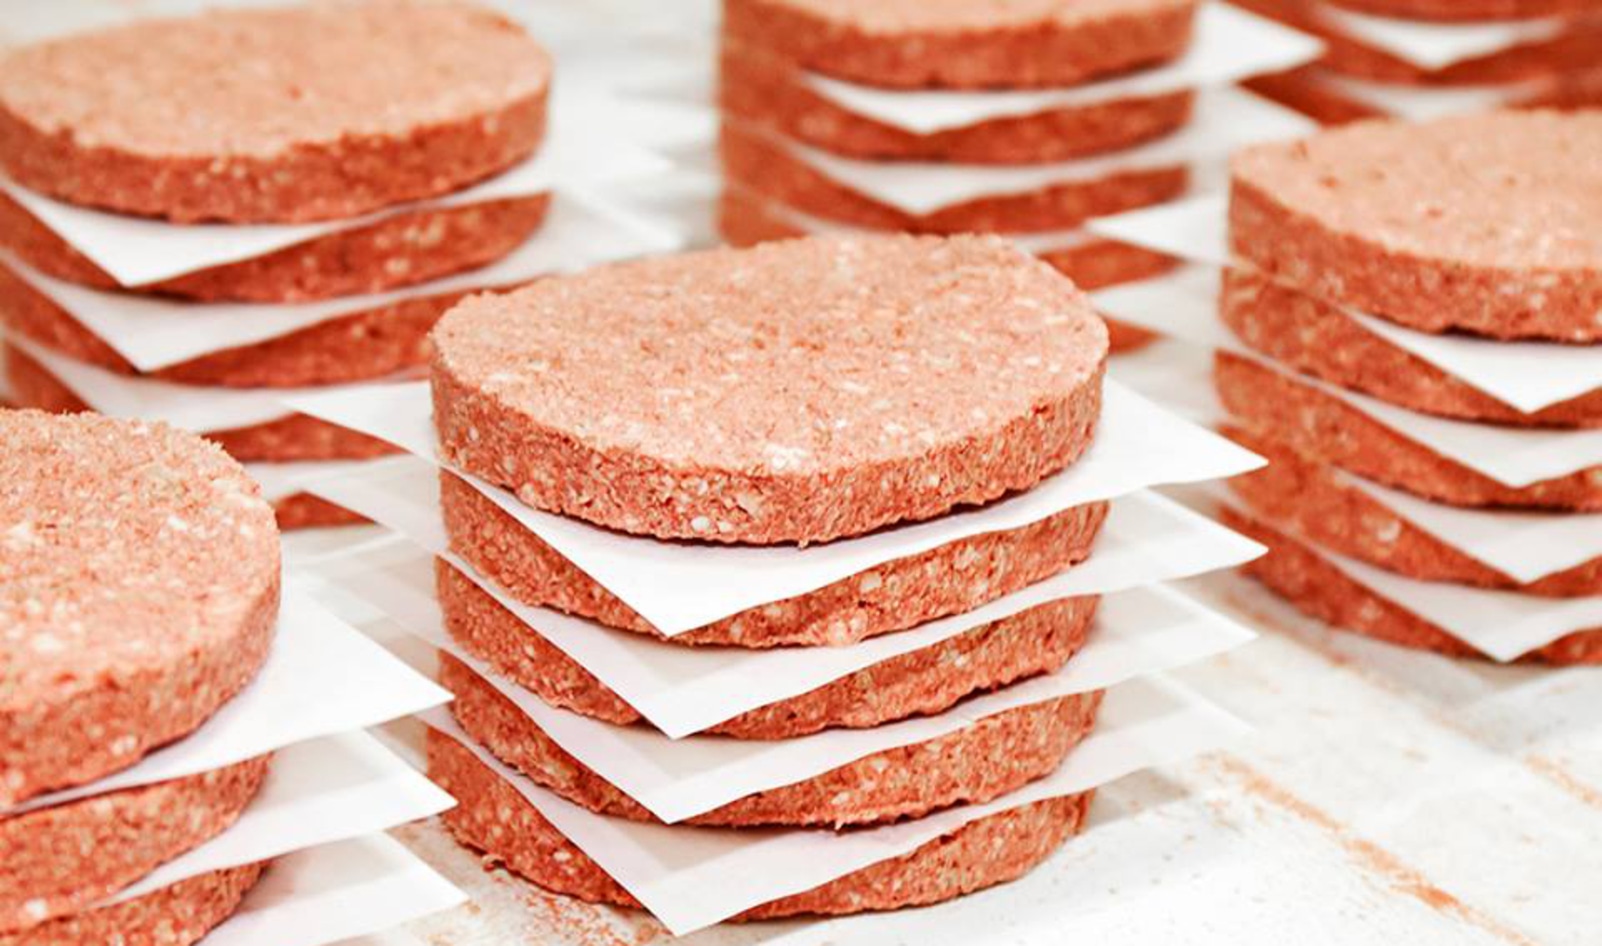 With Price Drop, Impossible Foods Takes First Step In Becoming Cheaper than Animal Meat